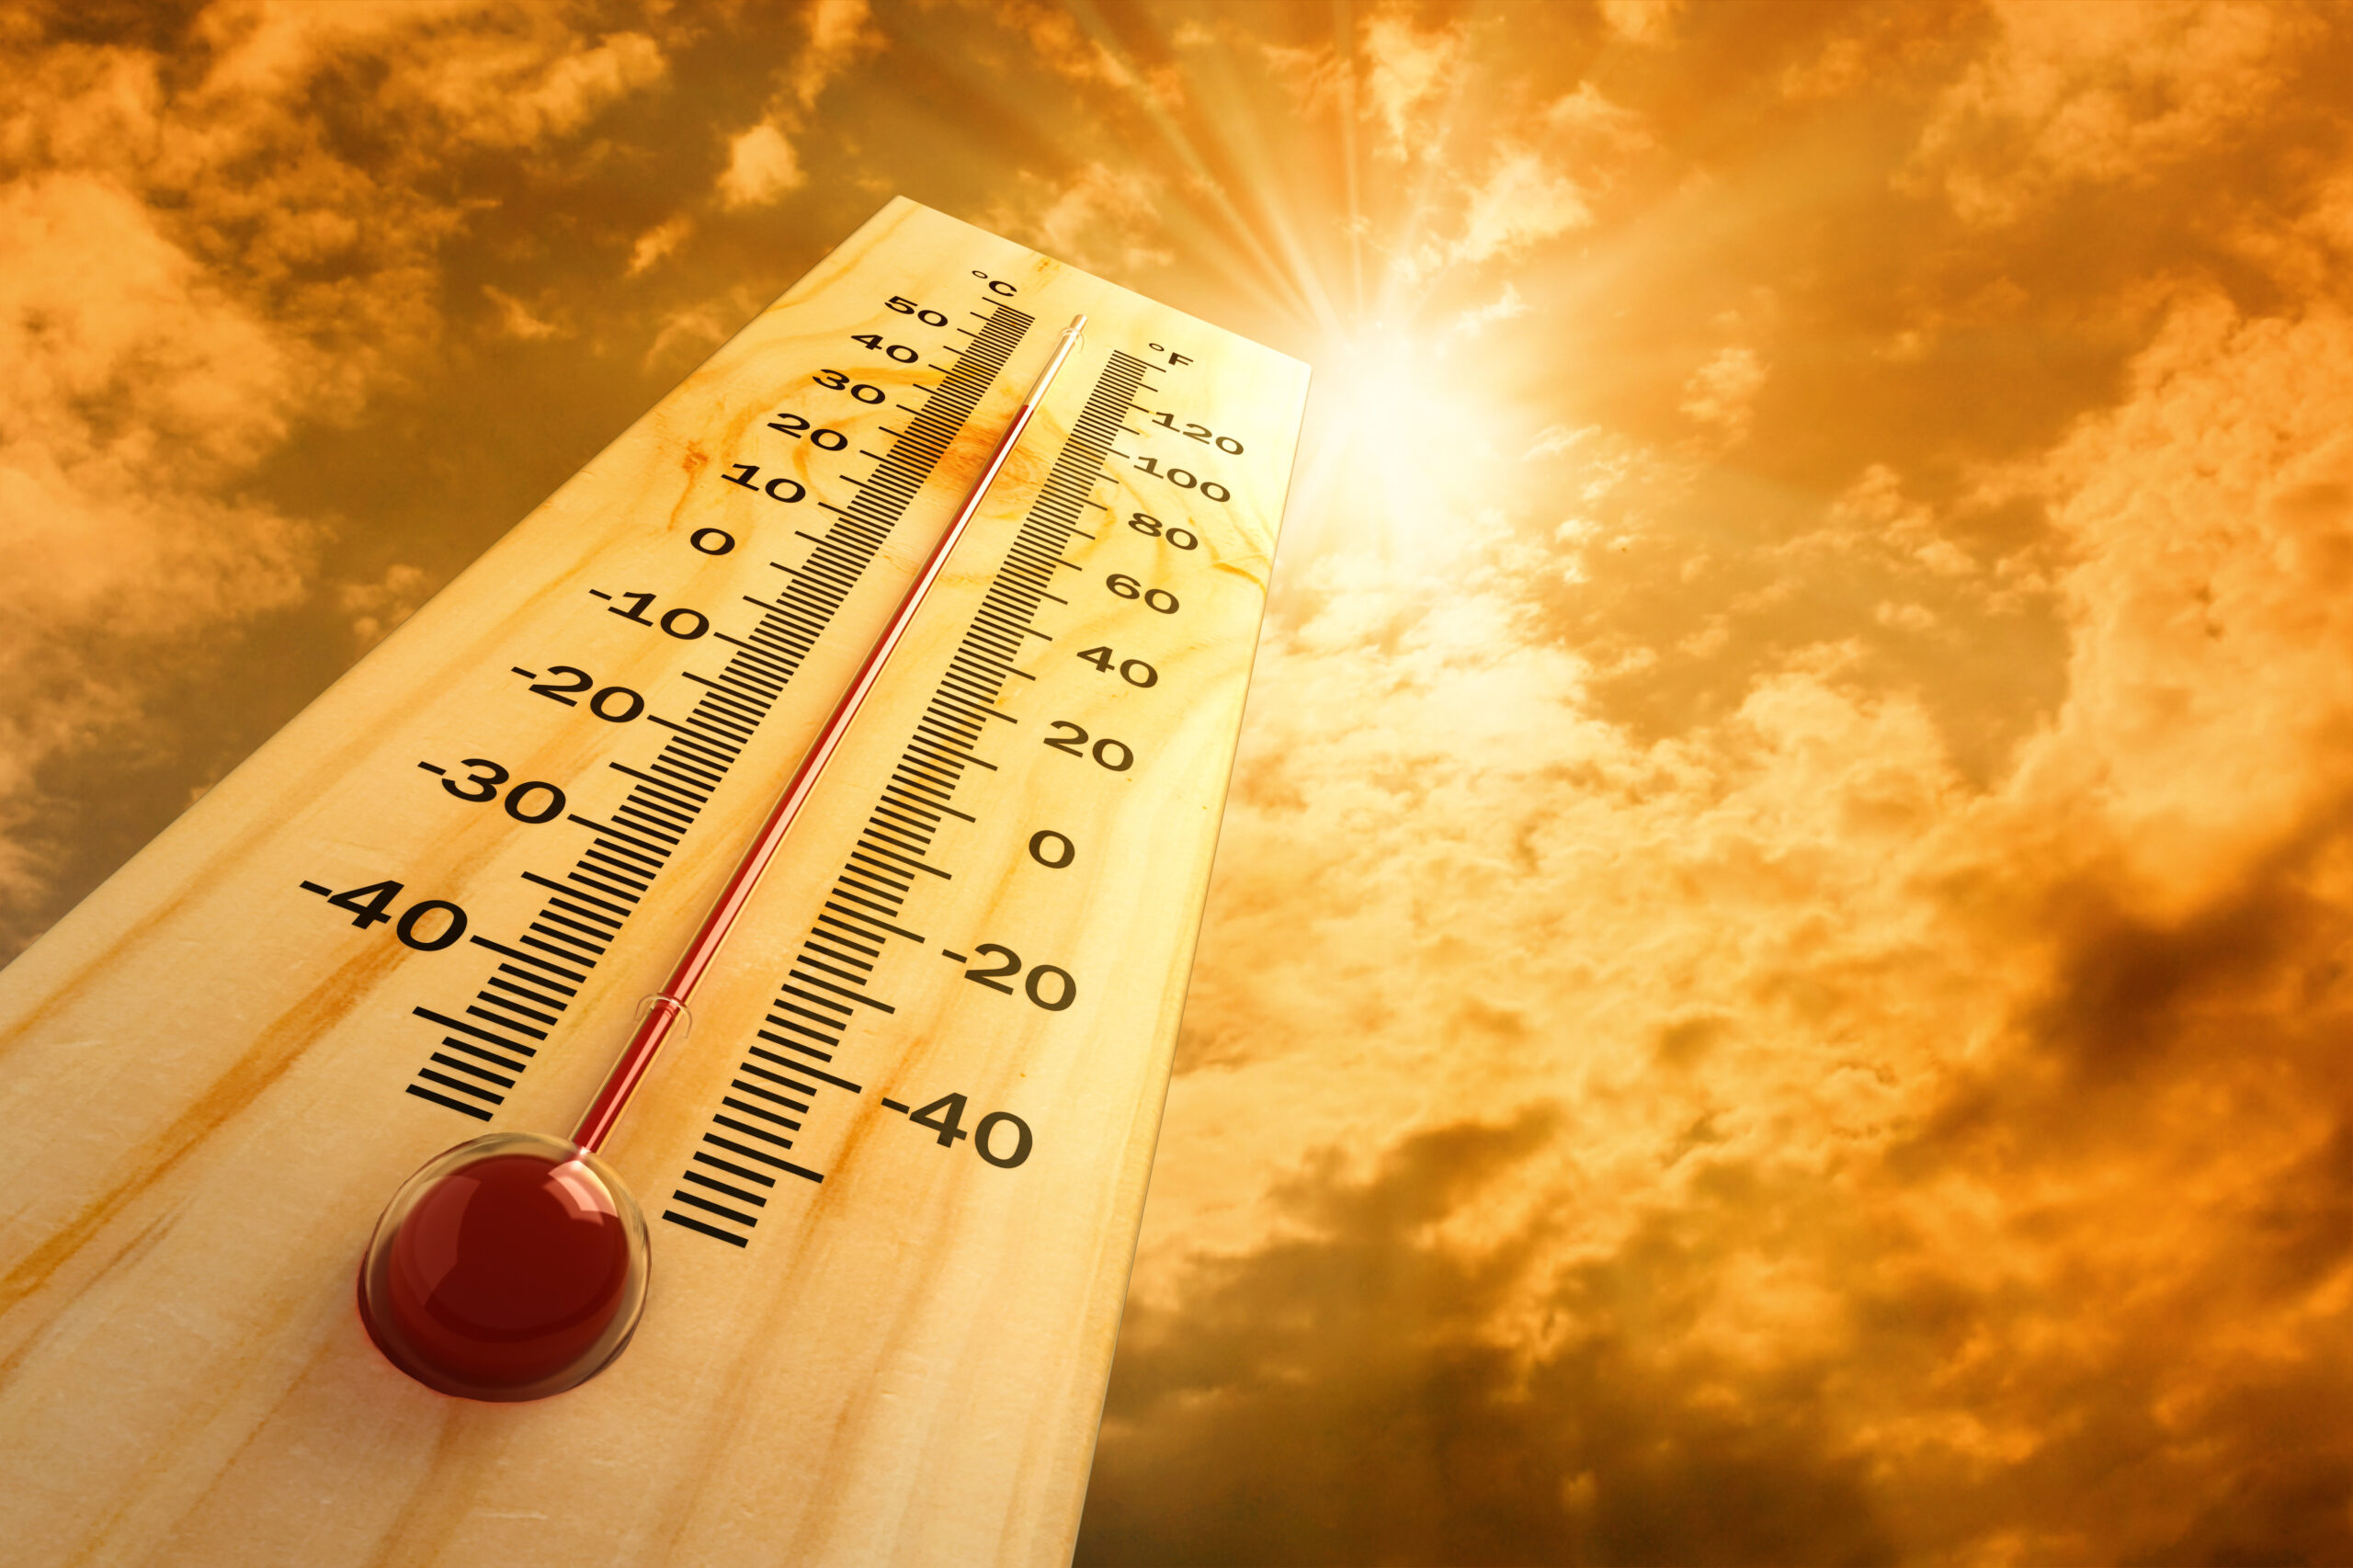 Stay alert and be mindful as summer temperatures rise